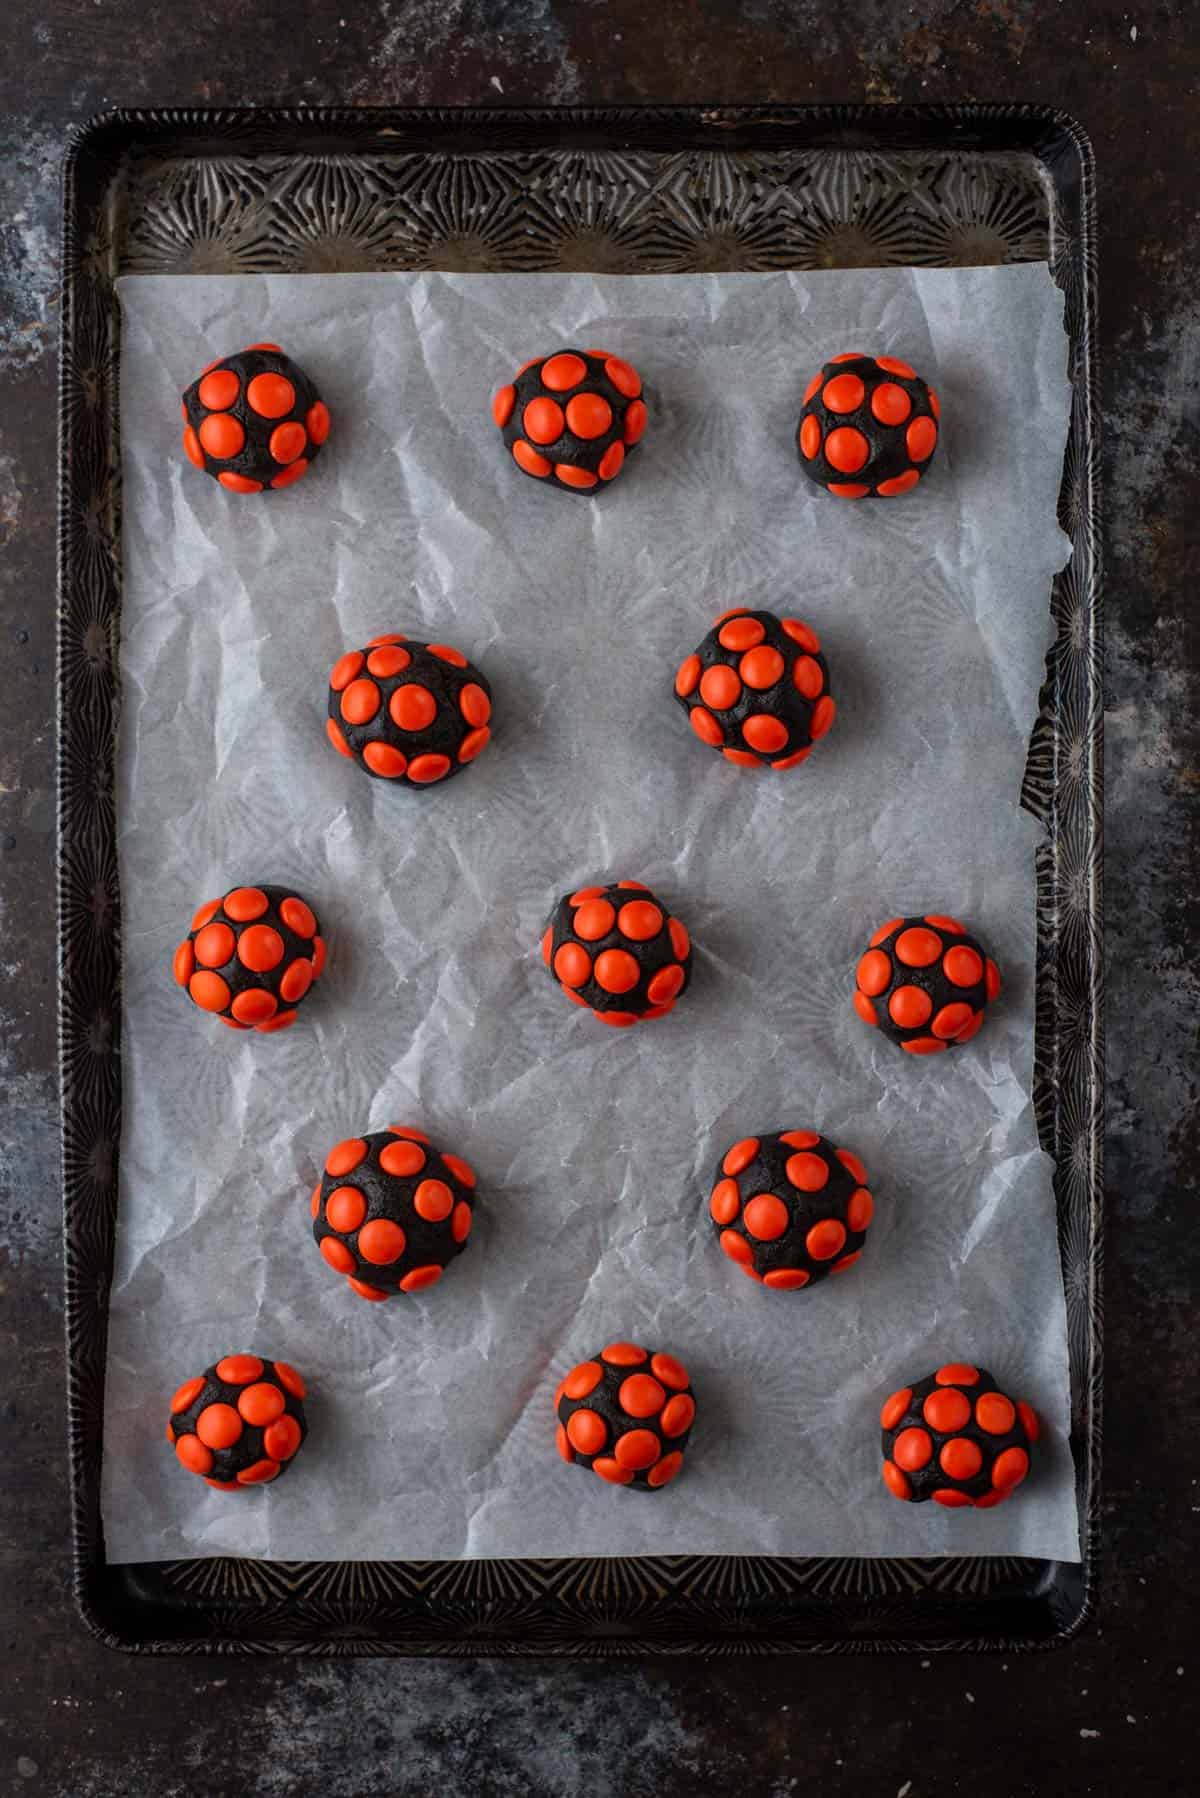 Balls of chocolate cookie dough covered in orange M&Ms